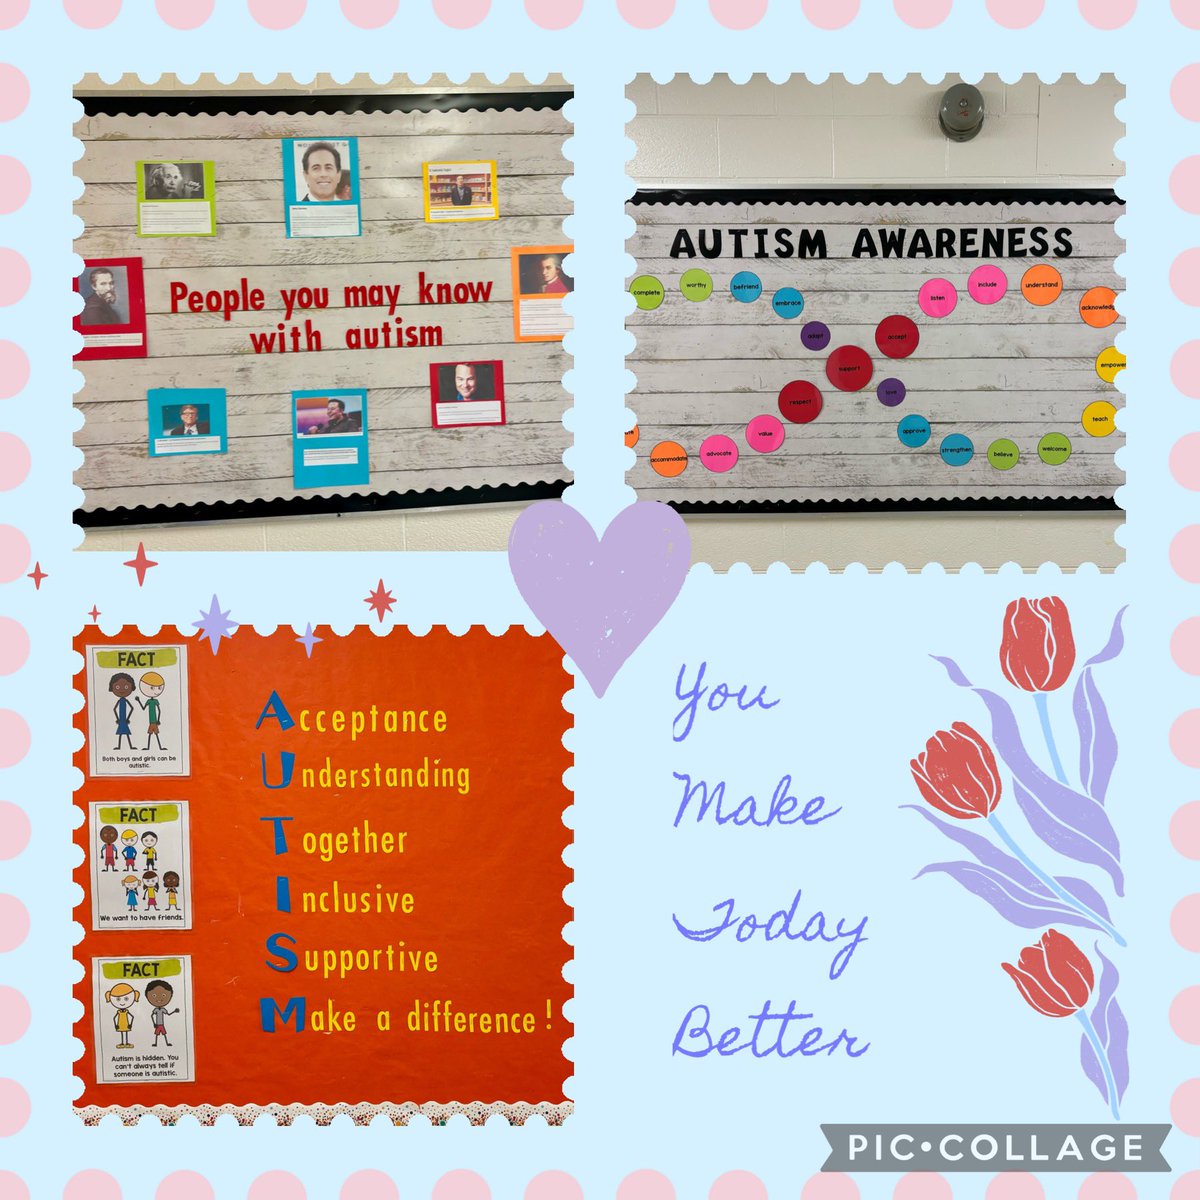 Celebrating inclusion and support for our students with Autism at St Roch!
We're spreading kindness, compassion and creating a more inclusive world. #Inclusion #AutismAwareness @TCDSB